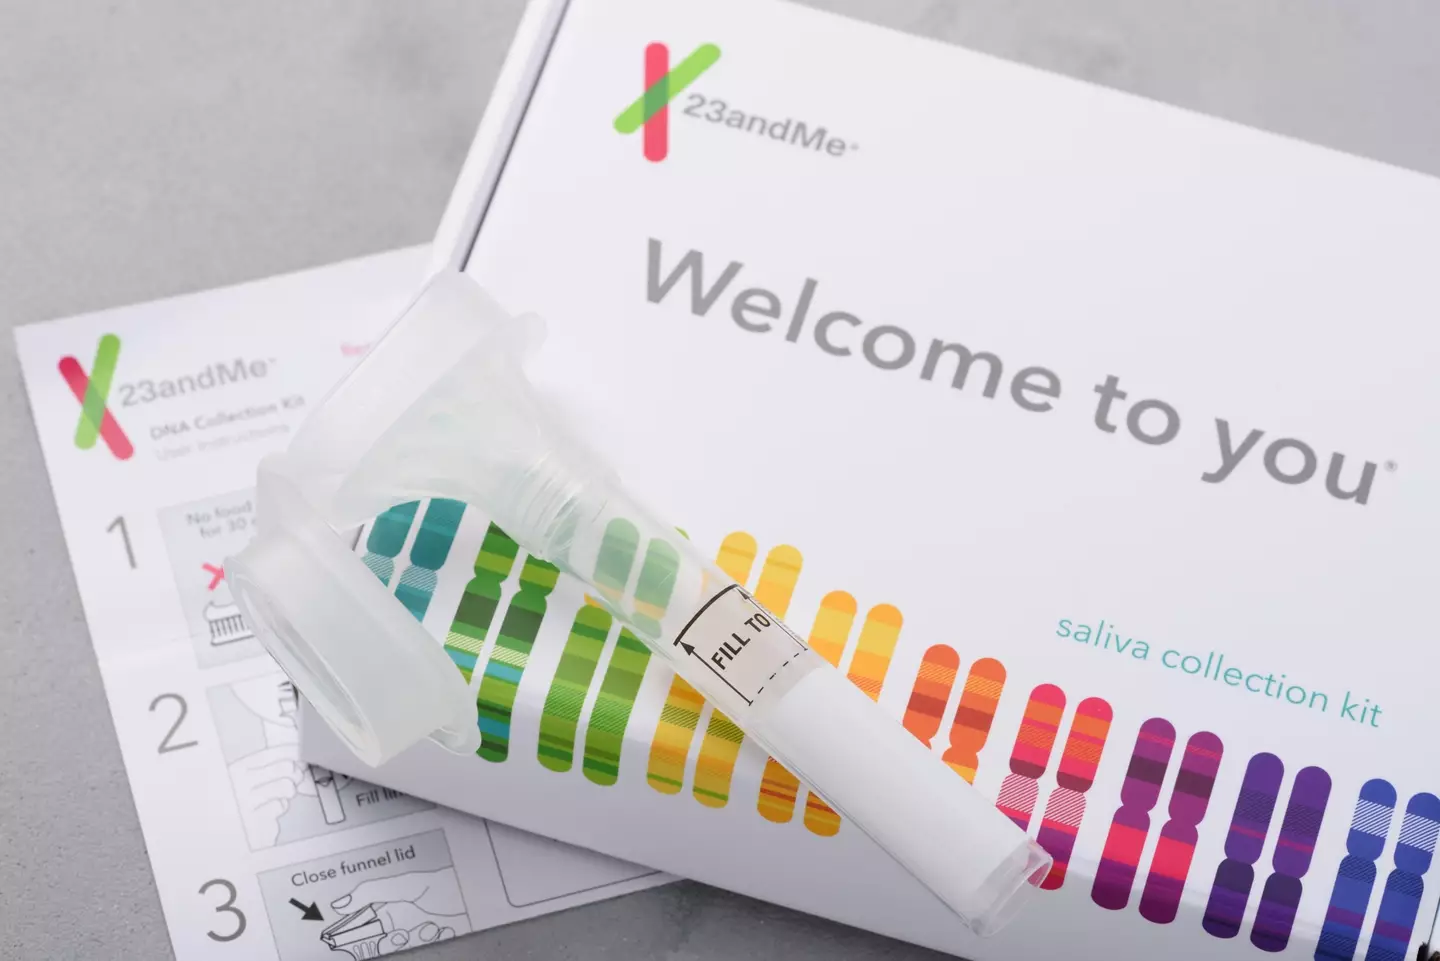 Jackie tested her DNA with 23andMe.